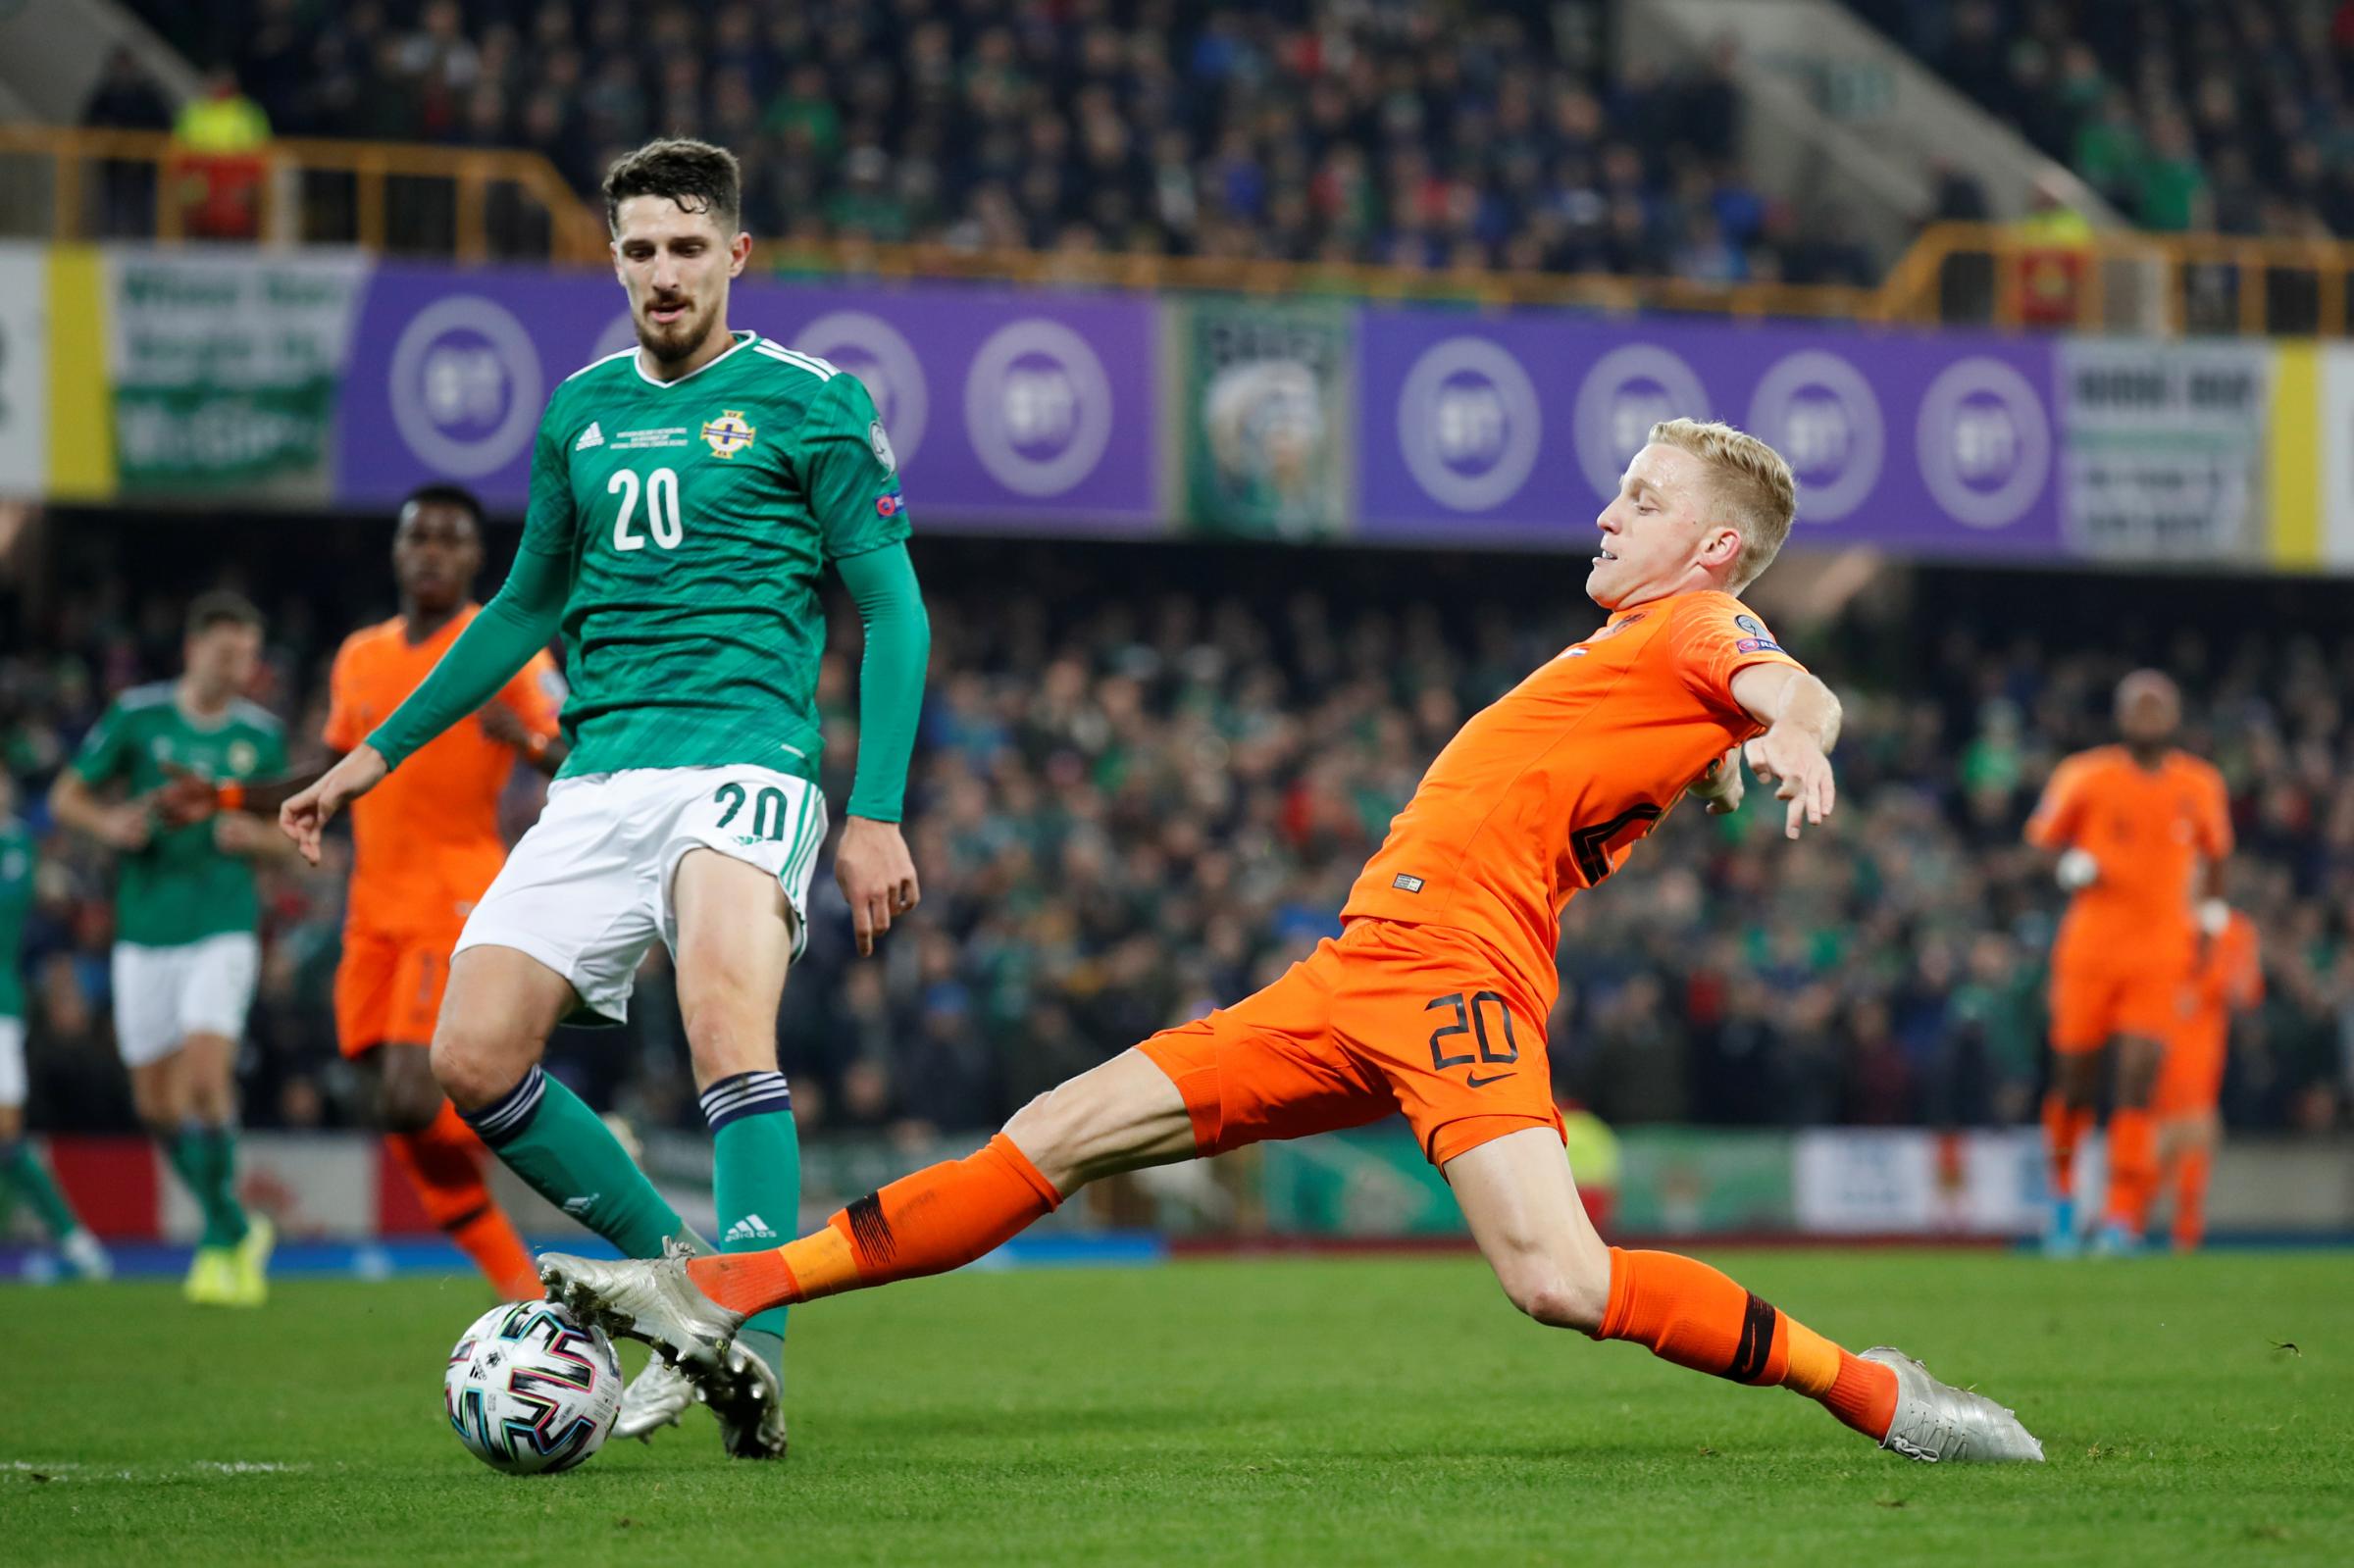 Watford's Craig Cathcart has Northern Ireland Euro 2020 play-offs moved to June